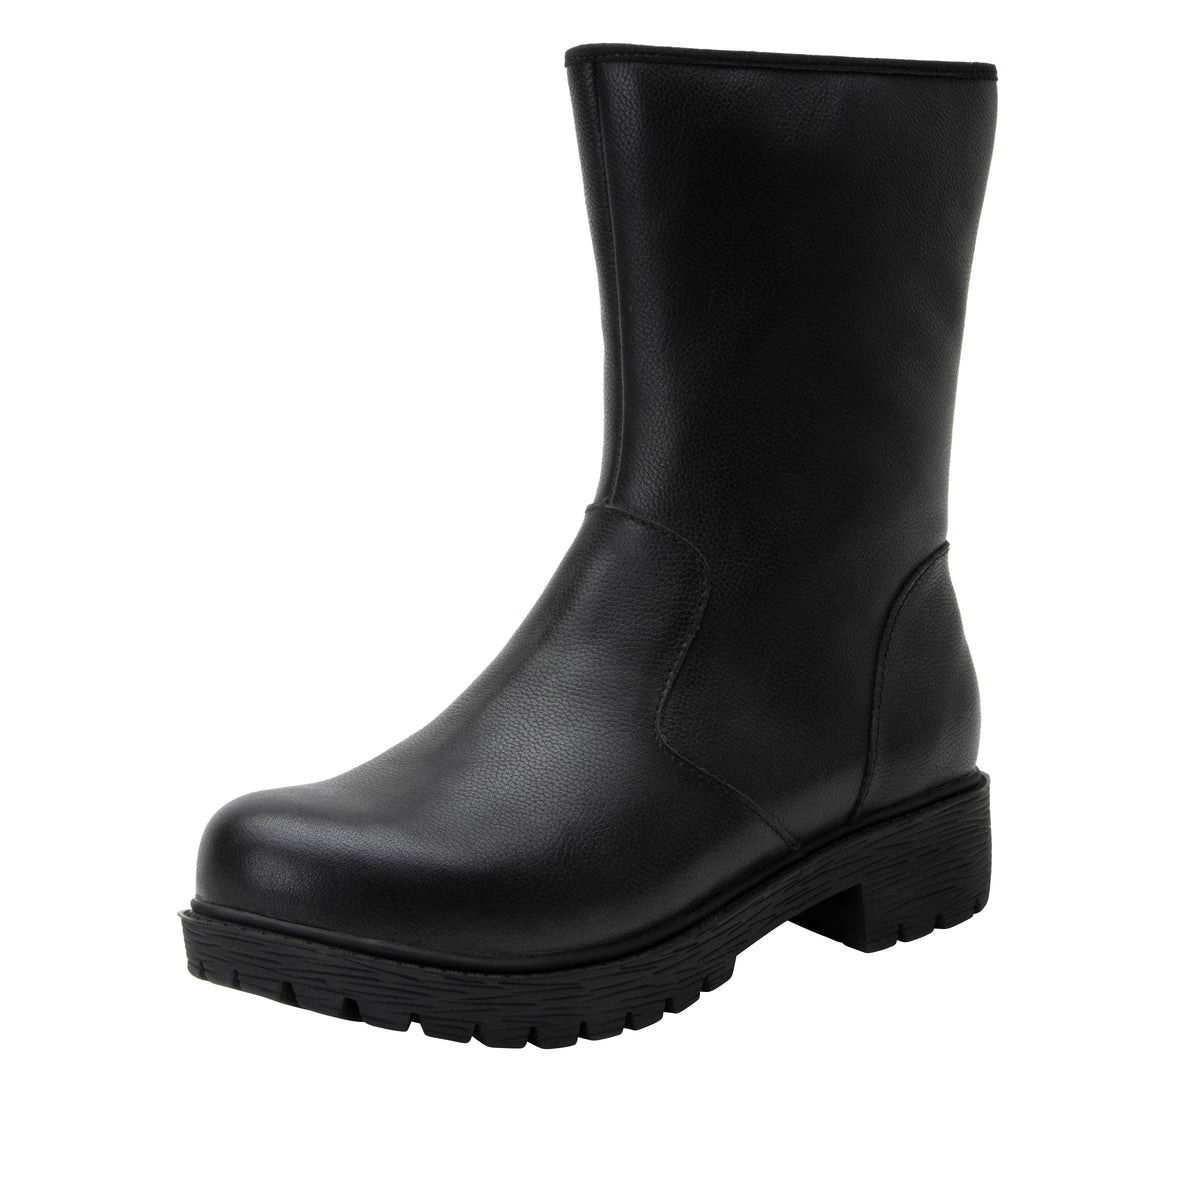 Chalet Upgrade Black Boot - Alegria Shoes